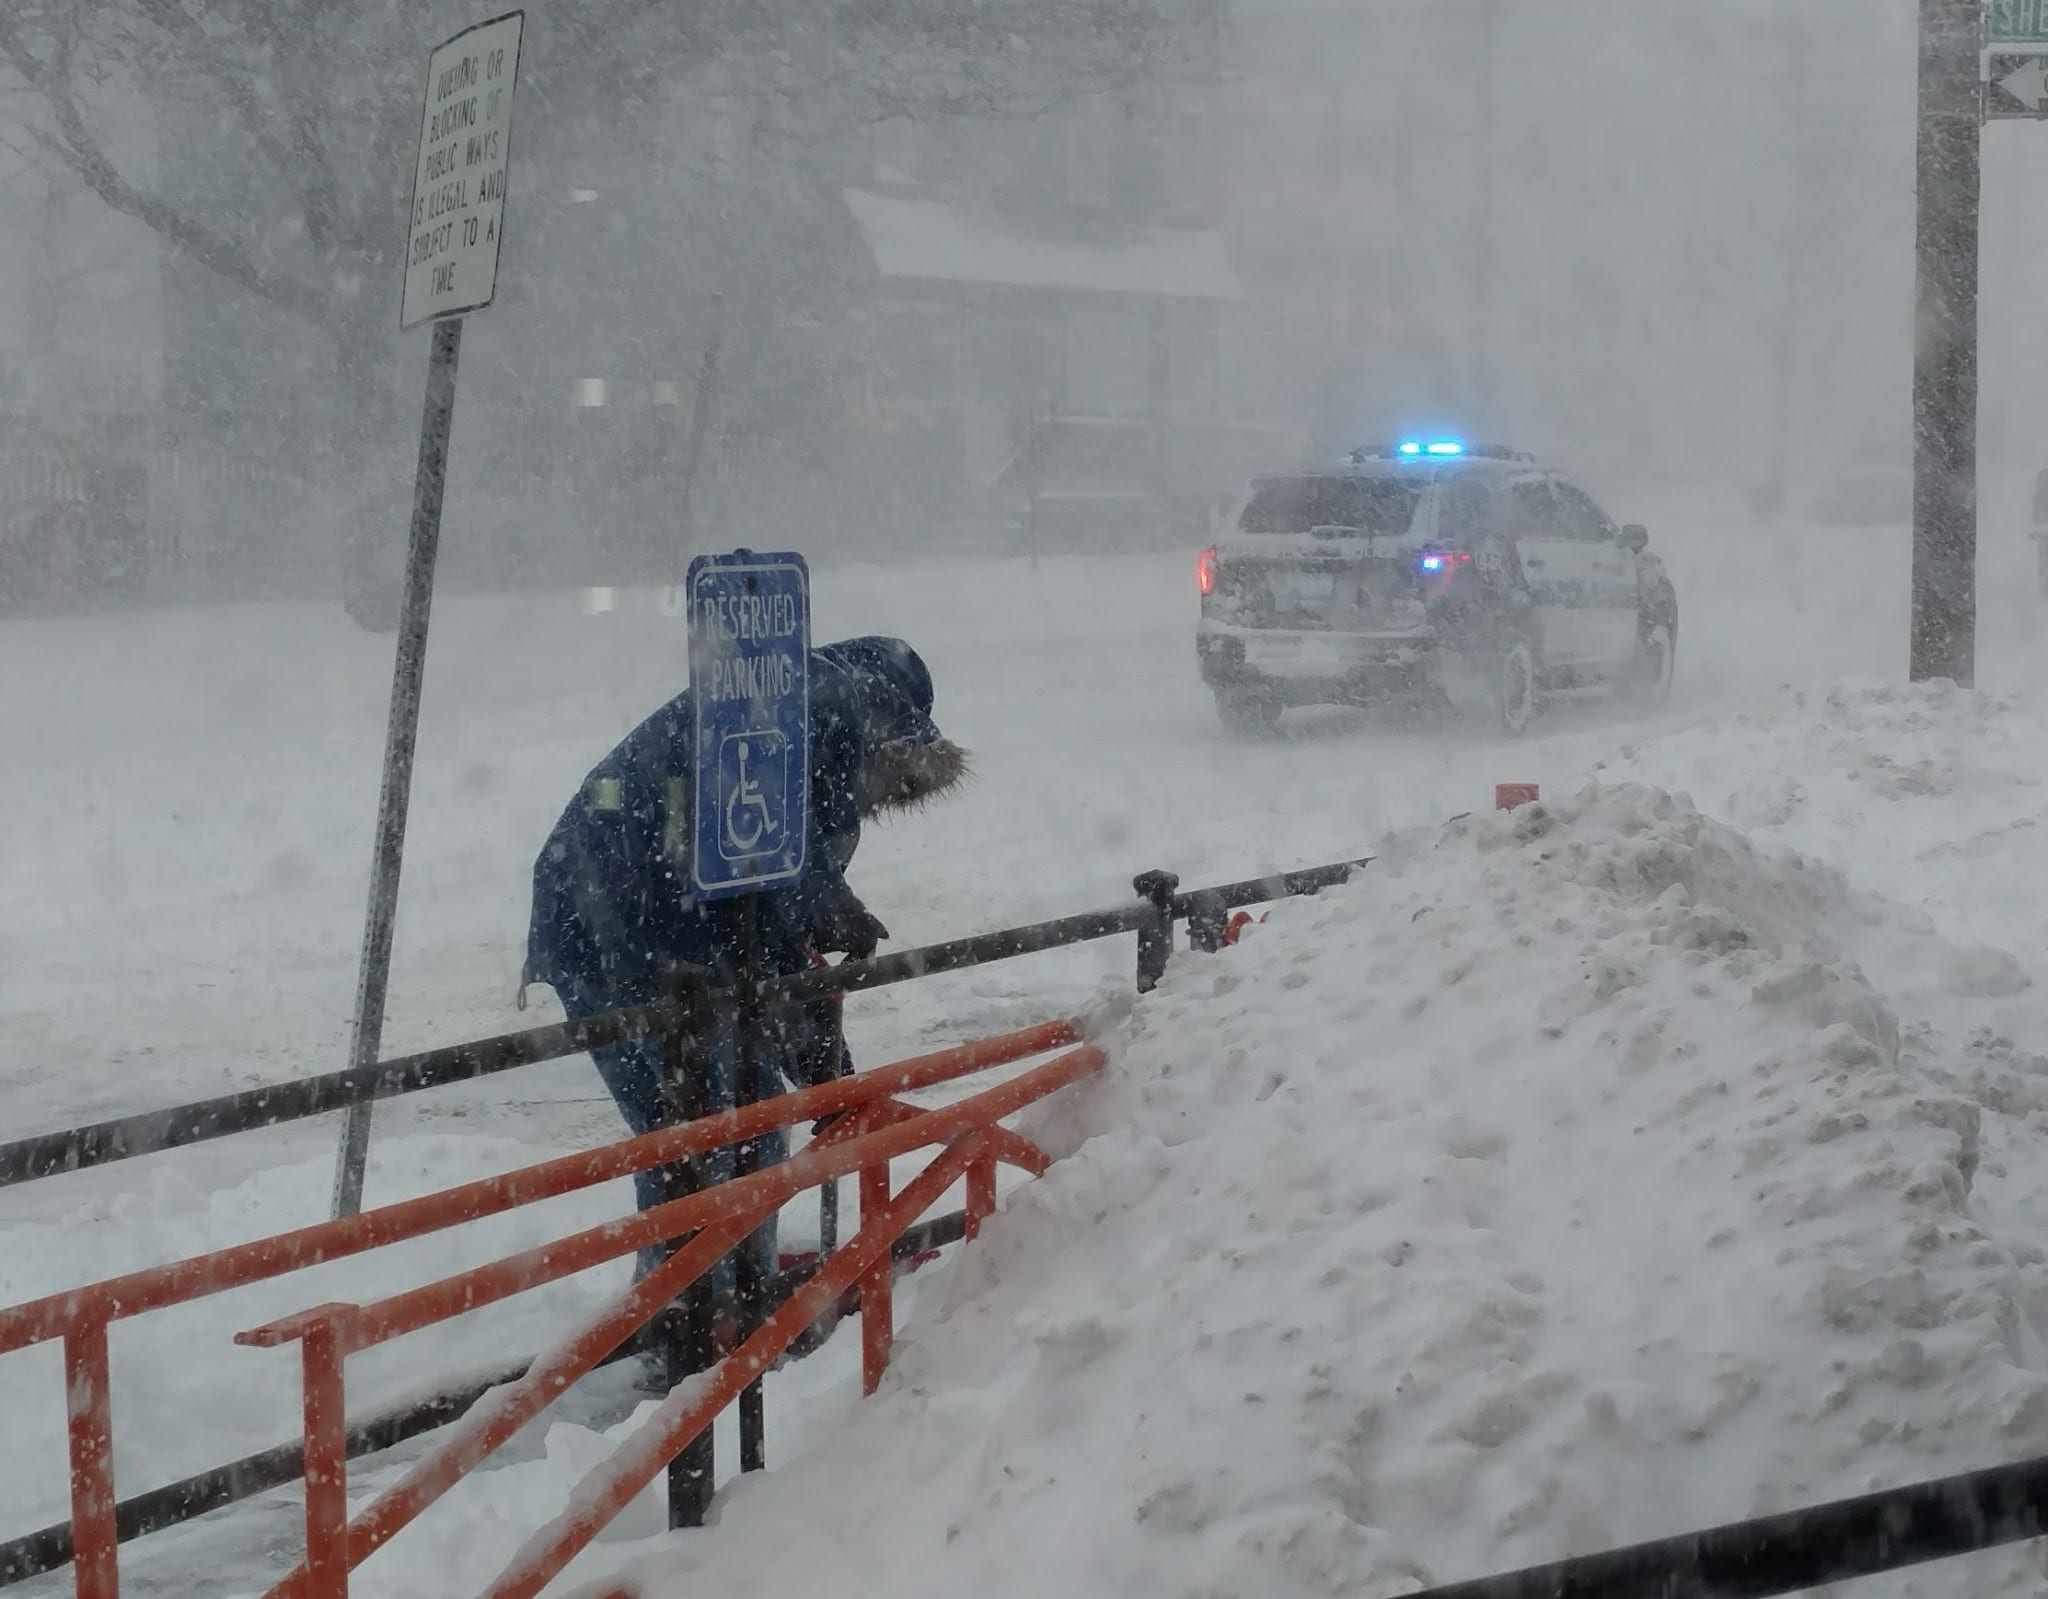 Heavy winds and snow caused near white-out conditions in Peabody near noon as most traffic was off the streets except for plows and police.